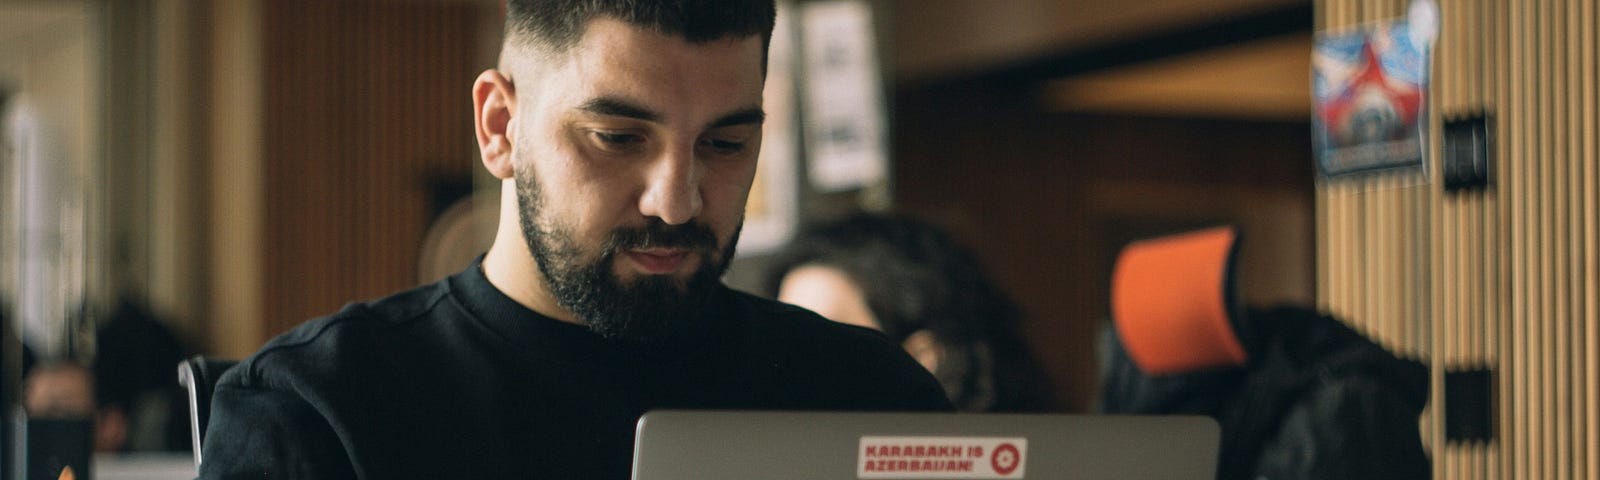 Bearded man wearing a black sweater typing on a portable computer in an office